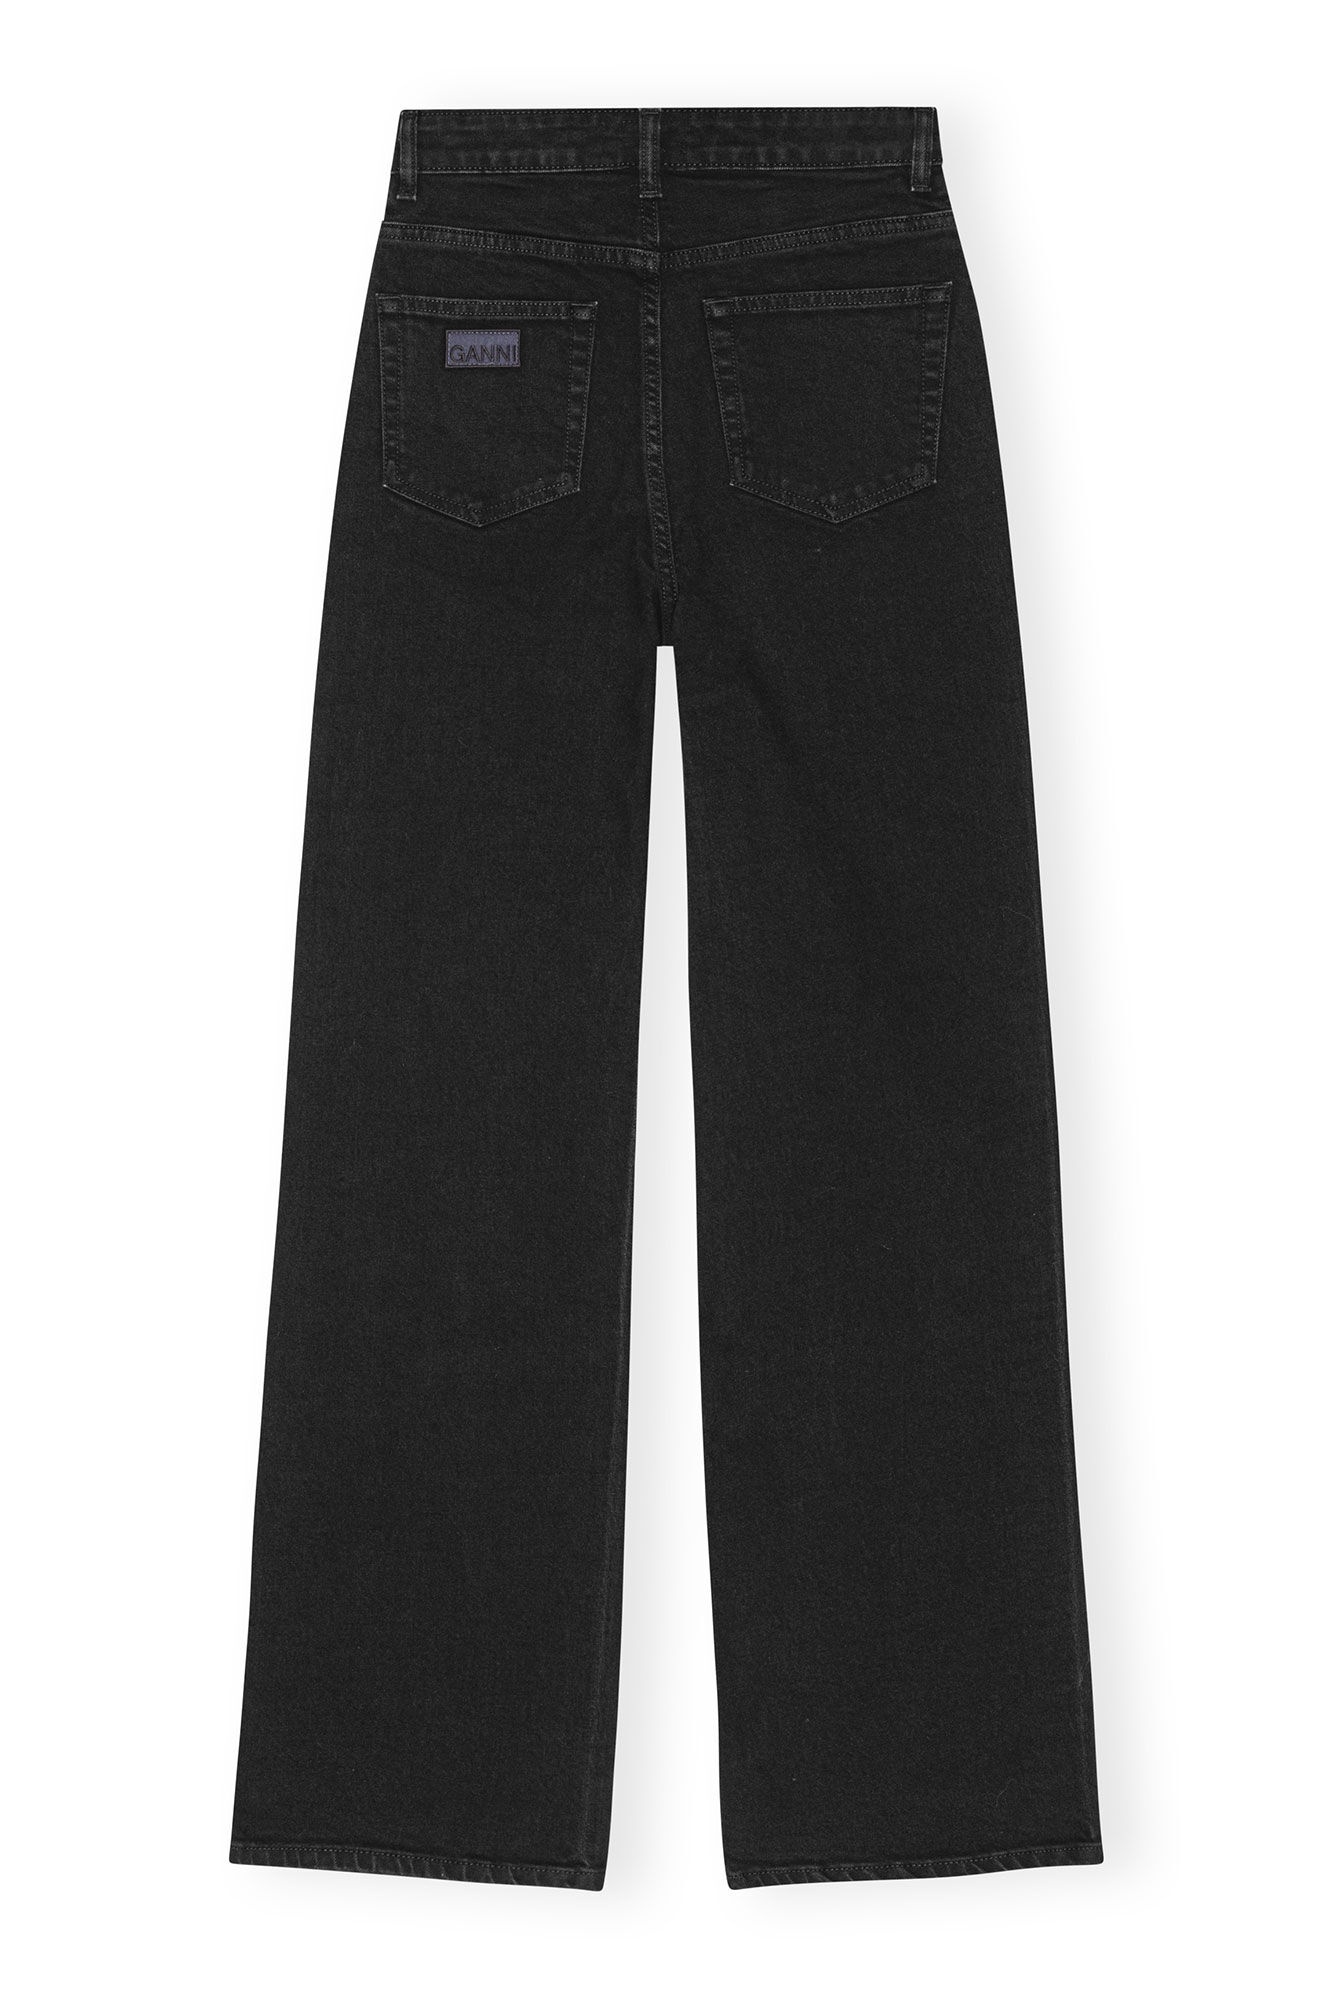 WASHED BLACK ANDI JEANS - 2